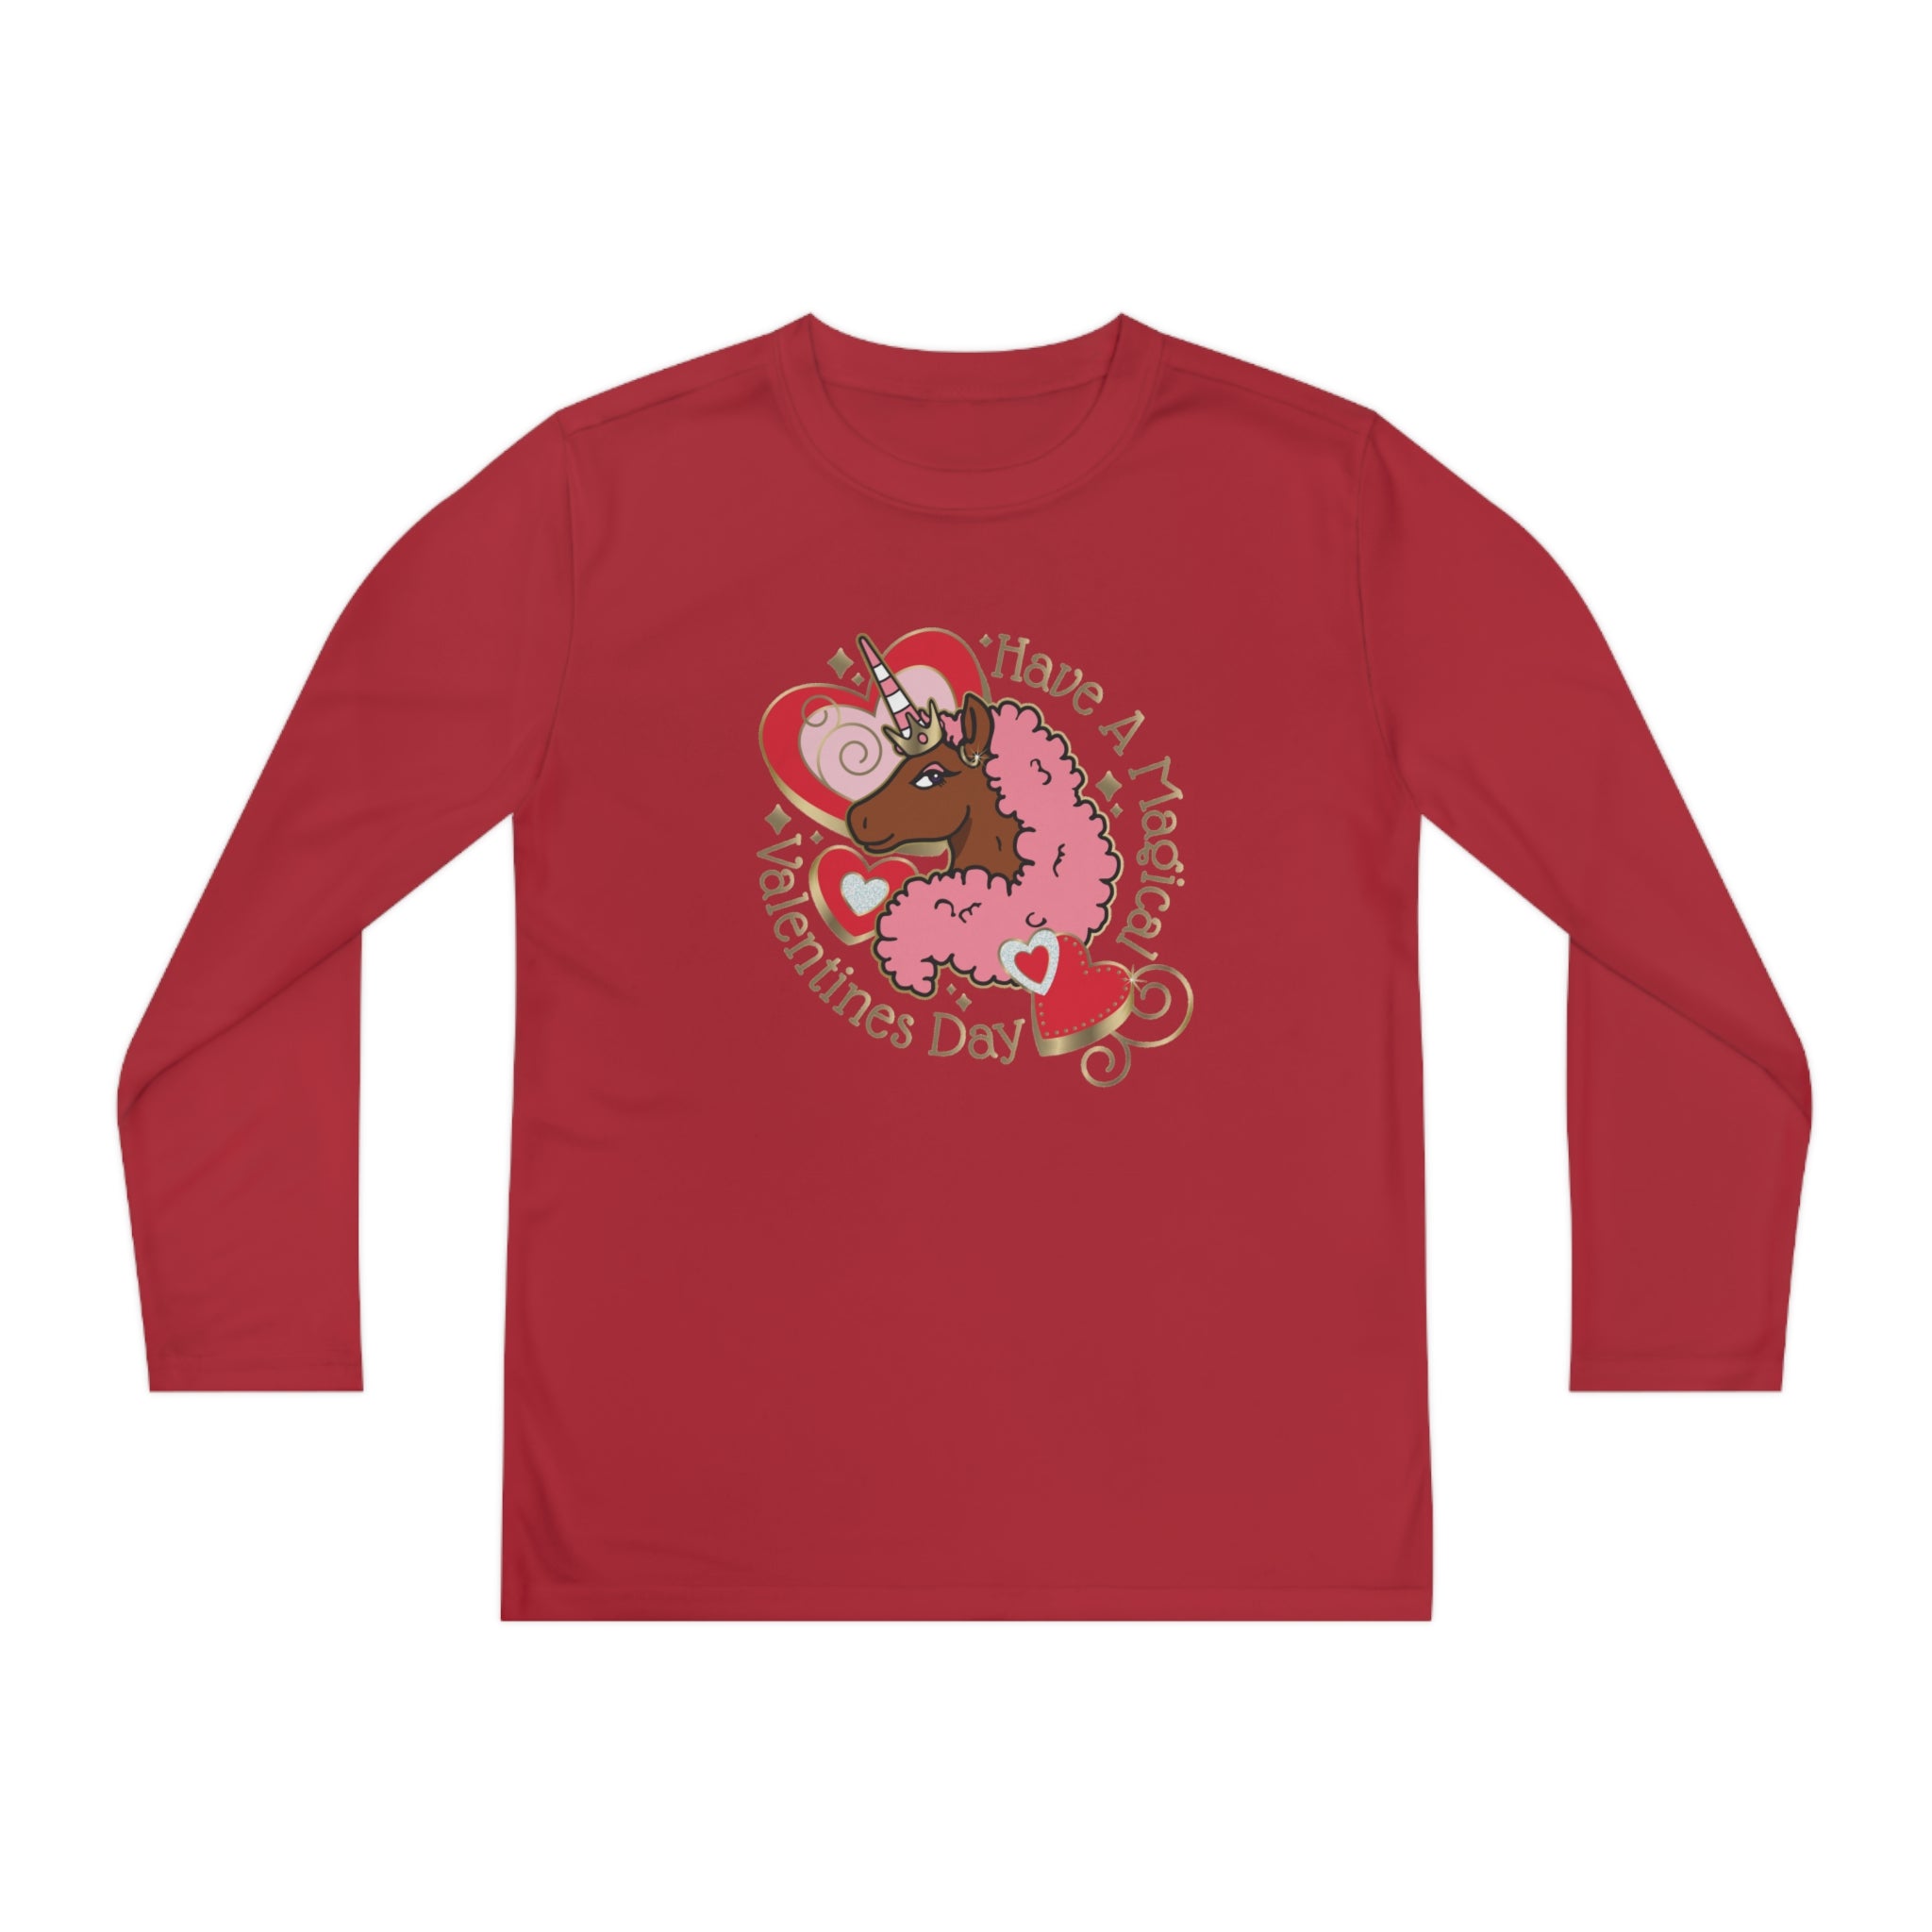 Afro Unicorn "Magical Valentine Day" Youth Long Tee